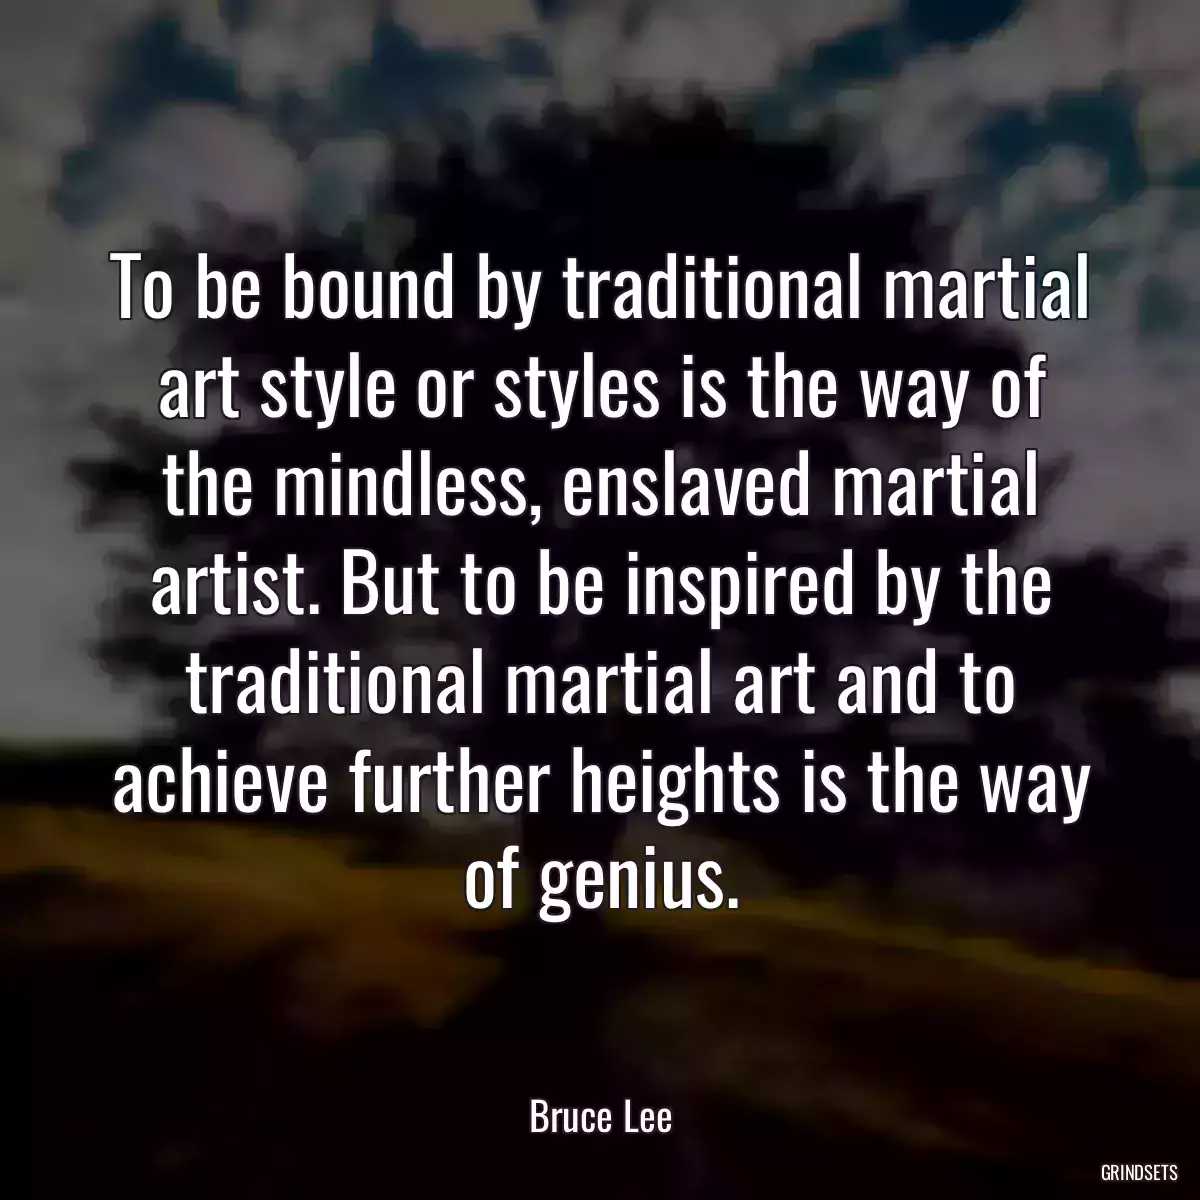 To be bound by traditional martial art style or styles is the way of the mindless, enslaved martial artist. But to be inspired by the traditional martial art and to achieve further heights is the way of genius.